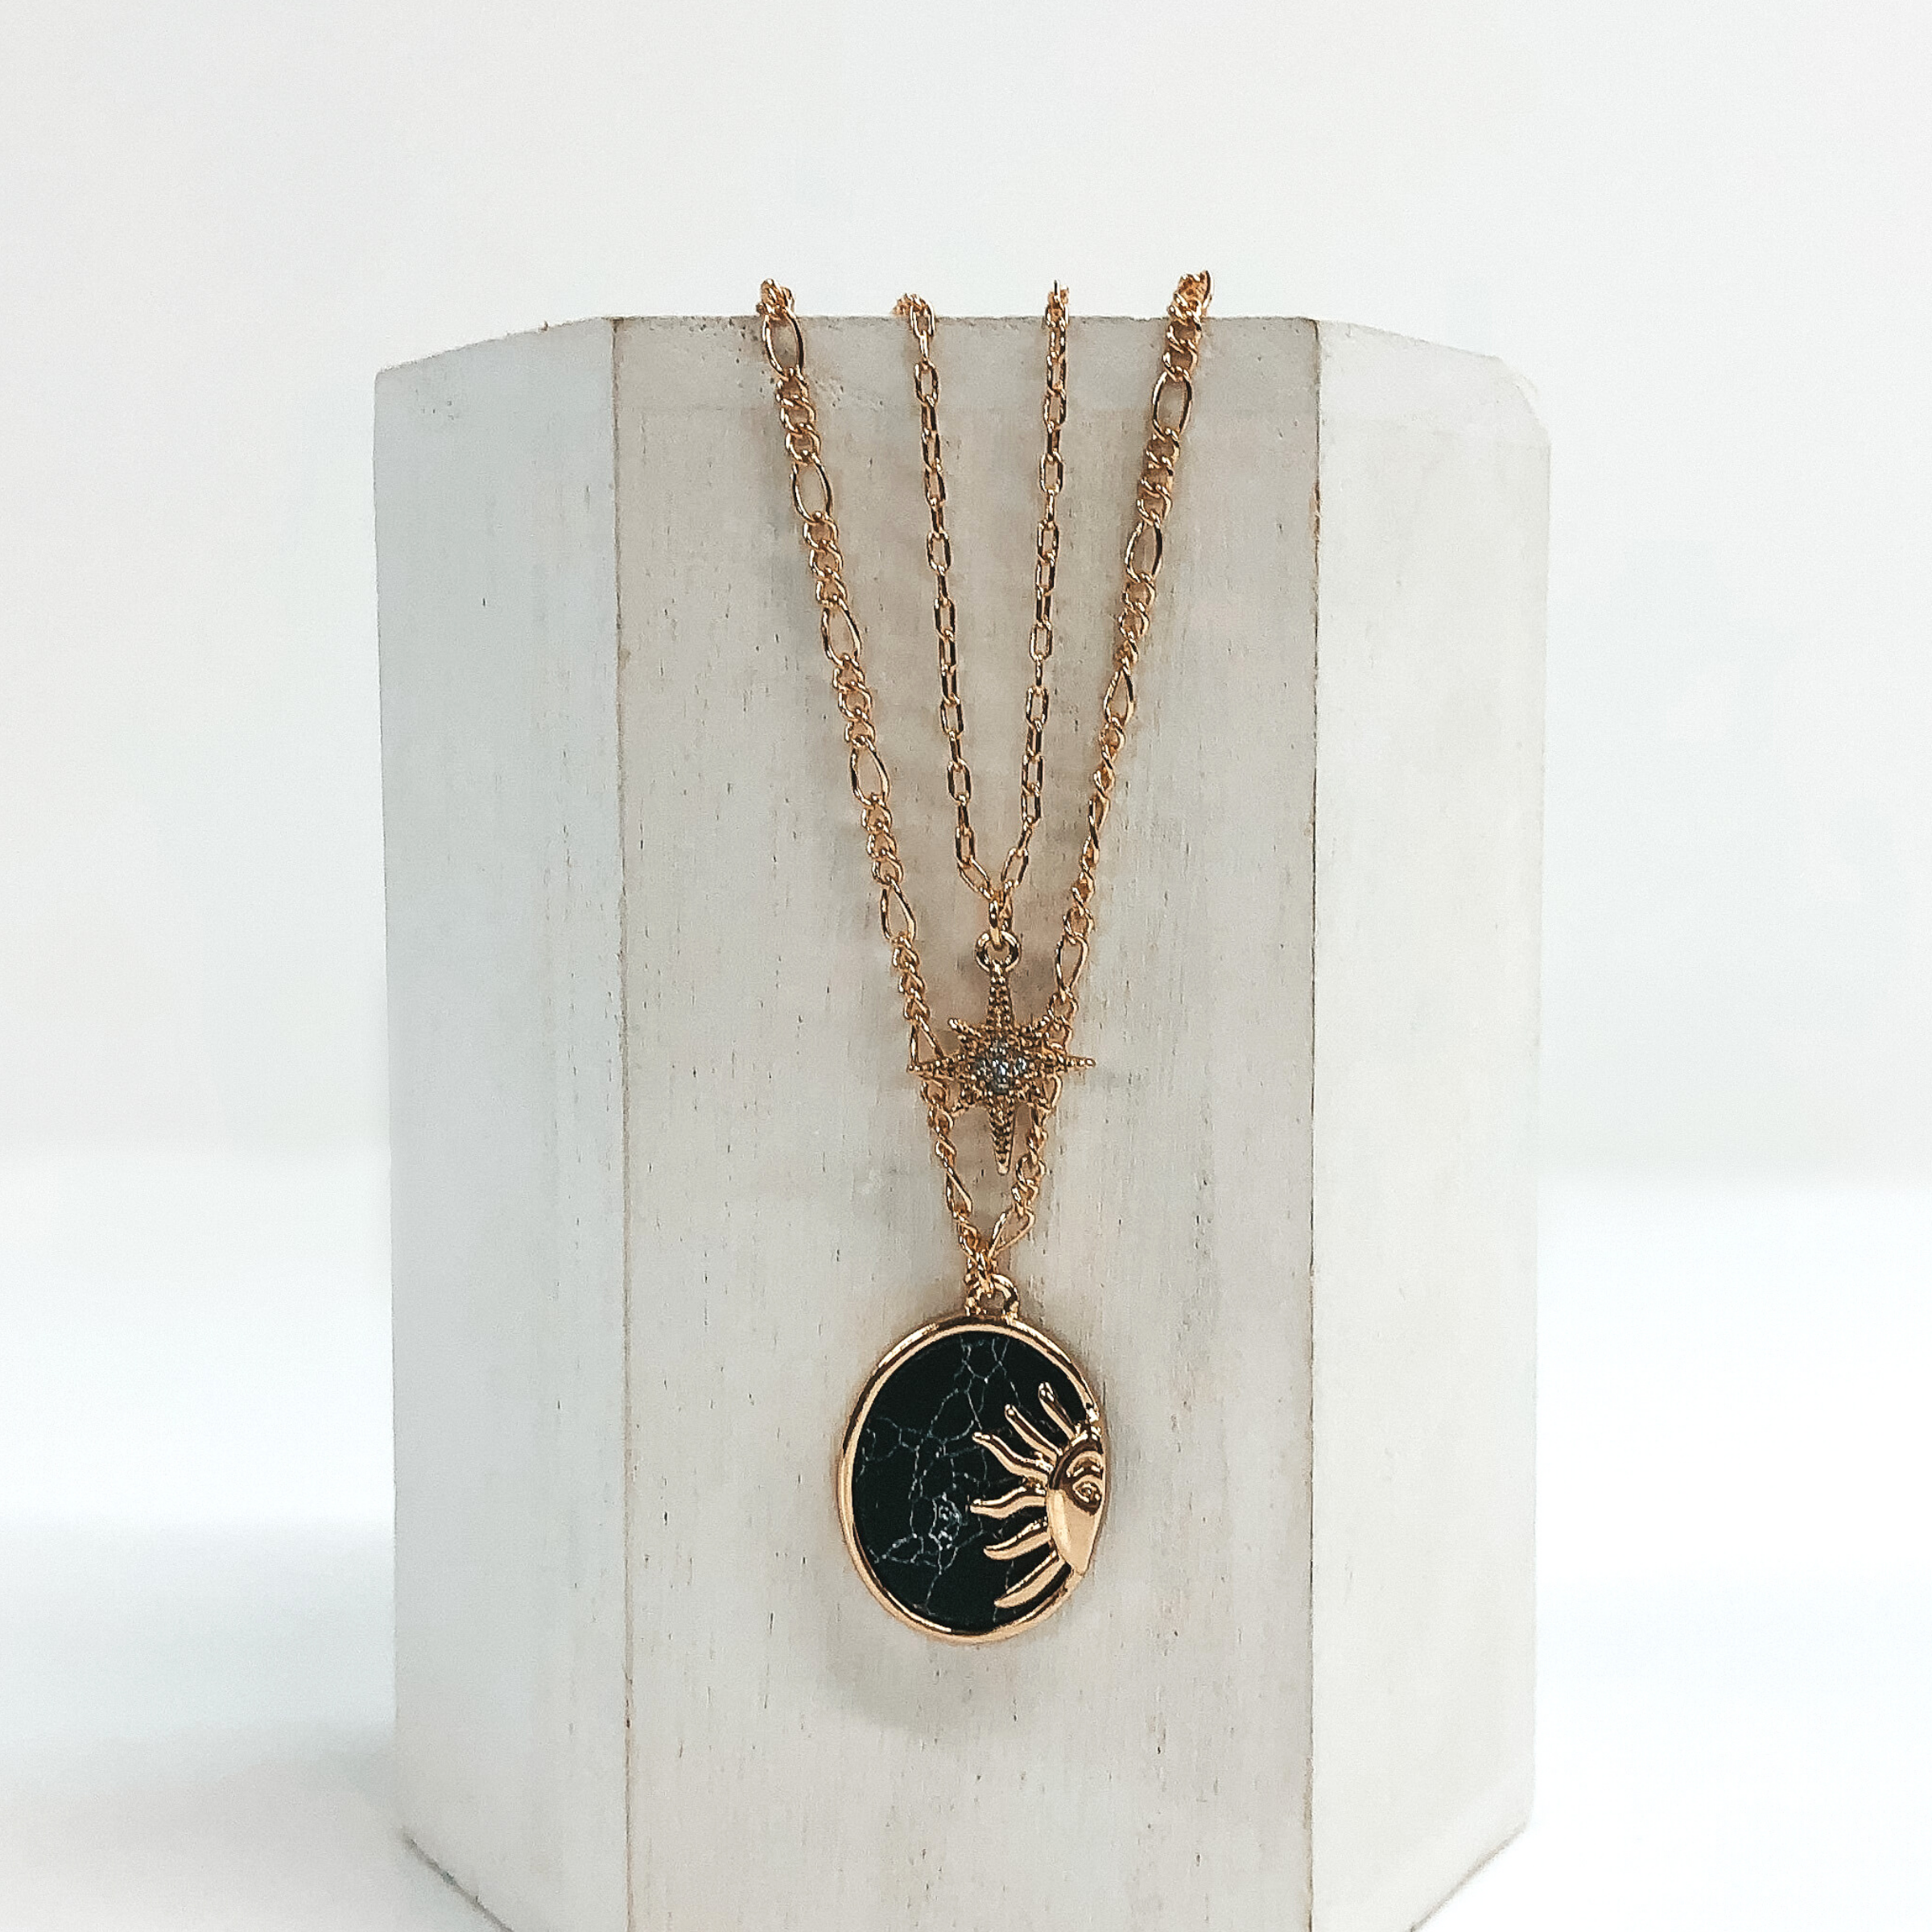 Double layered chain necklace in gold. The shorter strand has a gold star pendant with a center clear crystal and the longer strand has an oval black stone pendant with a half sun gold charm. This necklace is pictured hanging on a white block on a white background. 